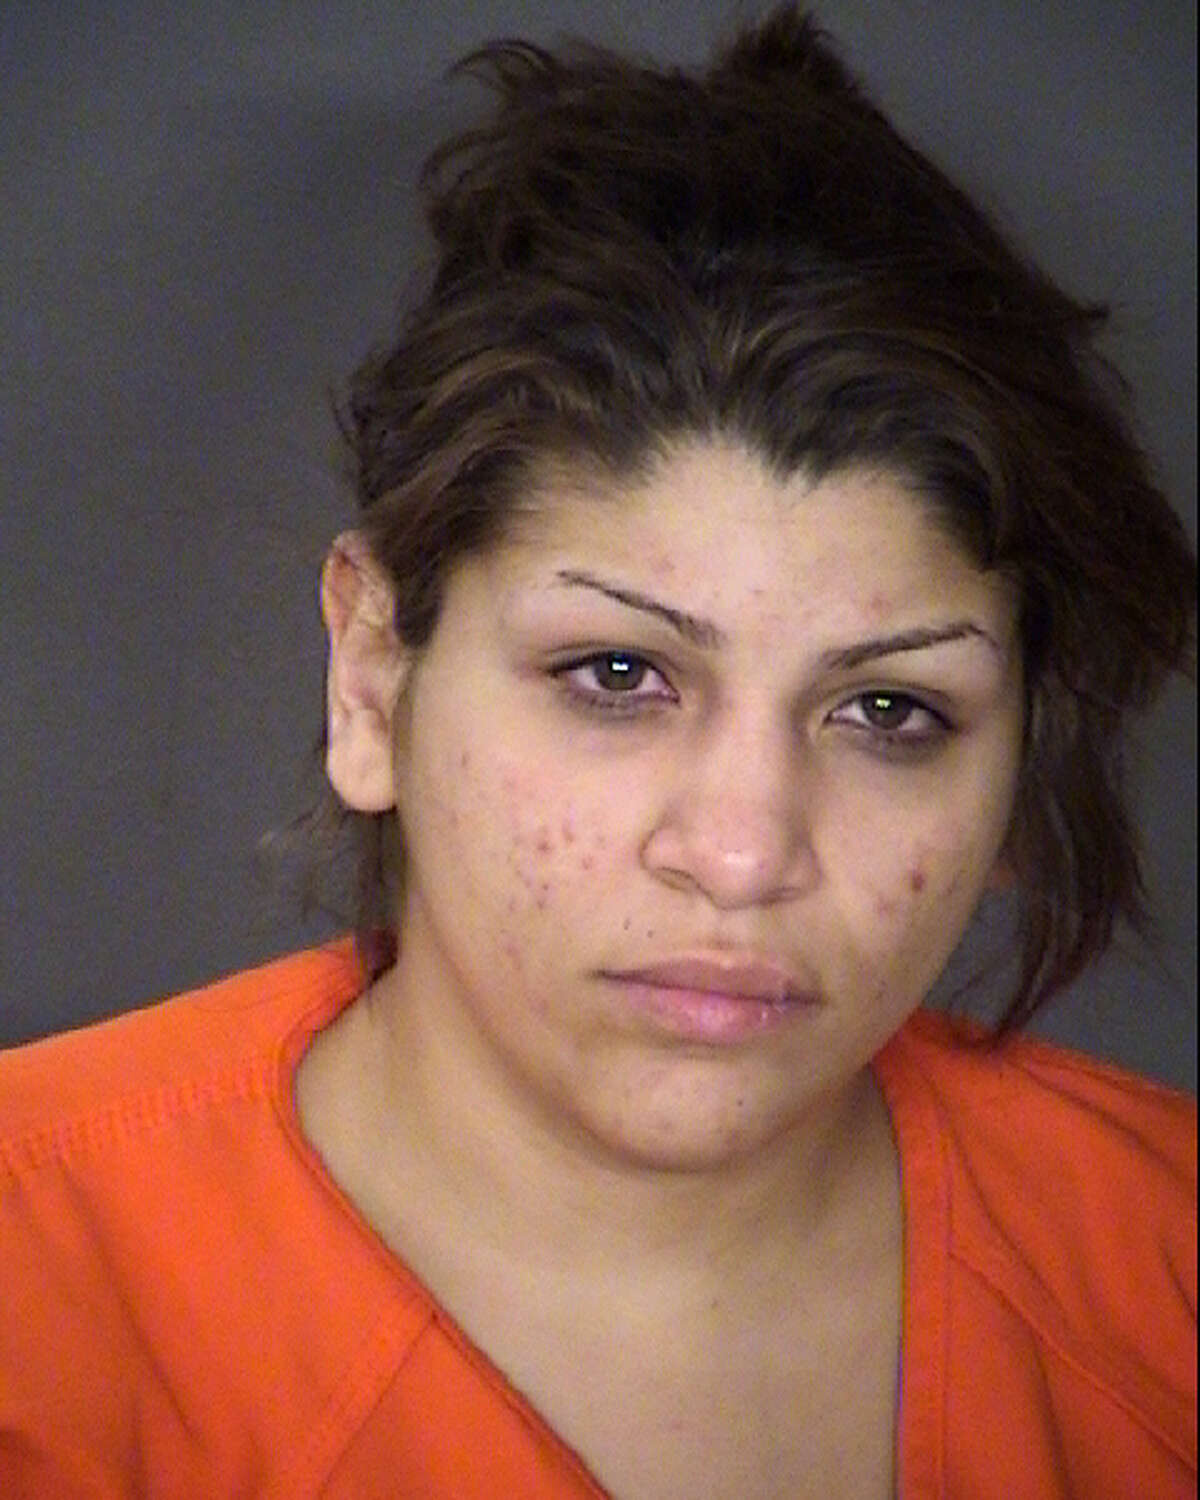 Rebecca Alvarez, 23, was arrested Jan. 16, 2017, for sex trafficking and sexual assault of a child.